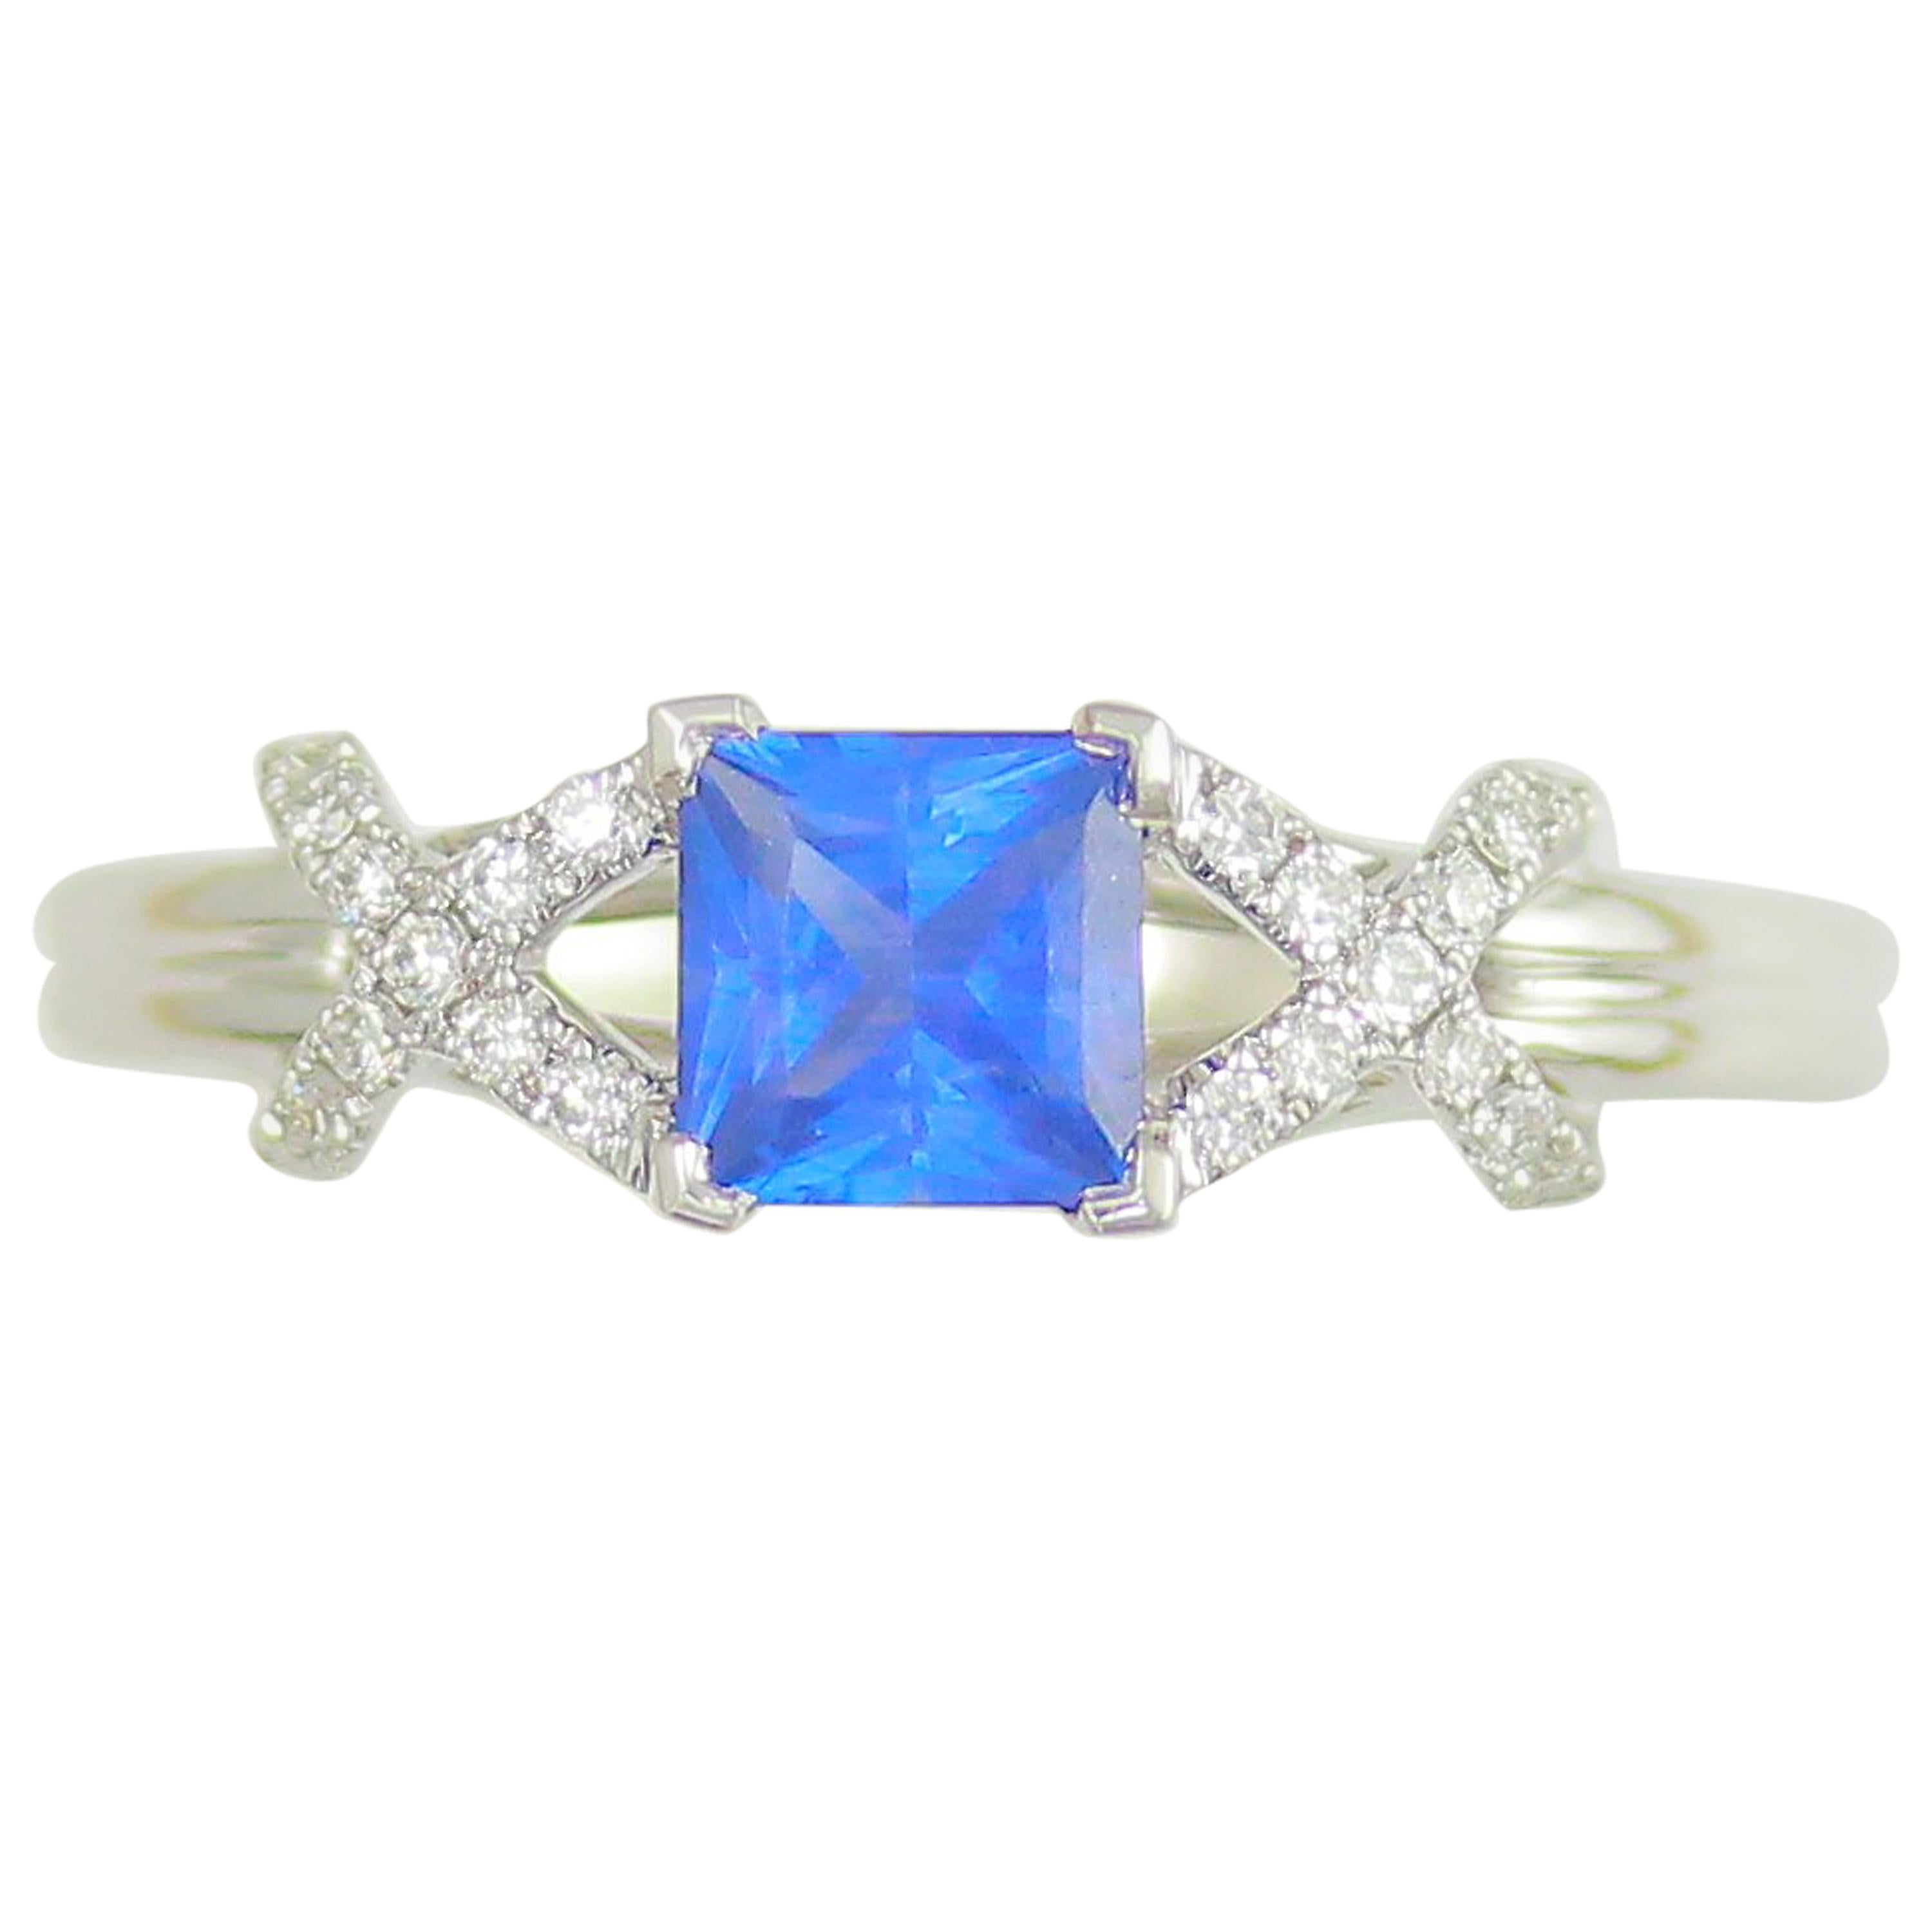 Frederic Sage 1.22 Carat Sapphire White Diamond Engagement Bridal Cocktail Ring For Sale